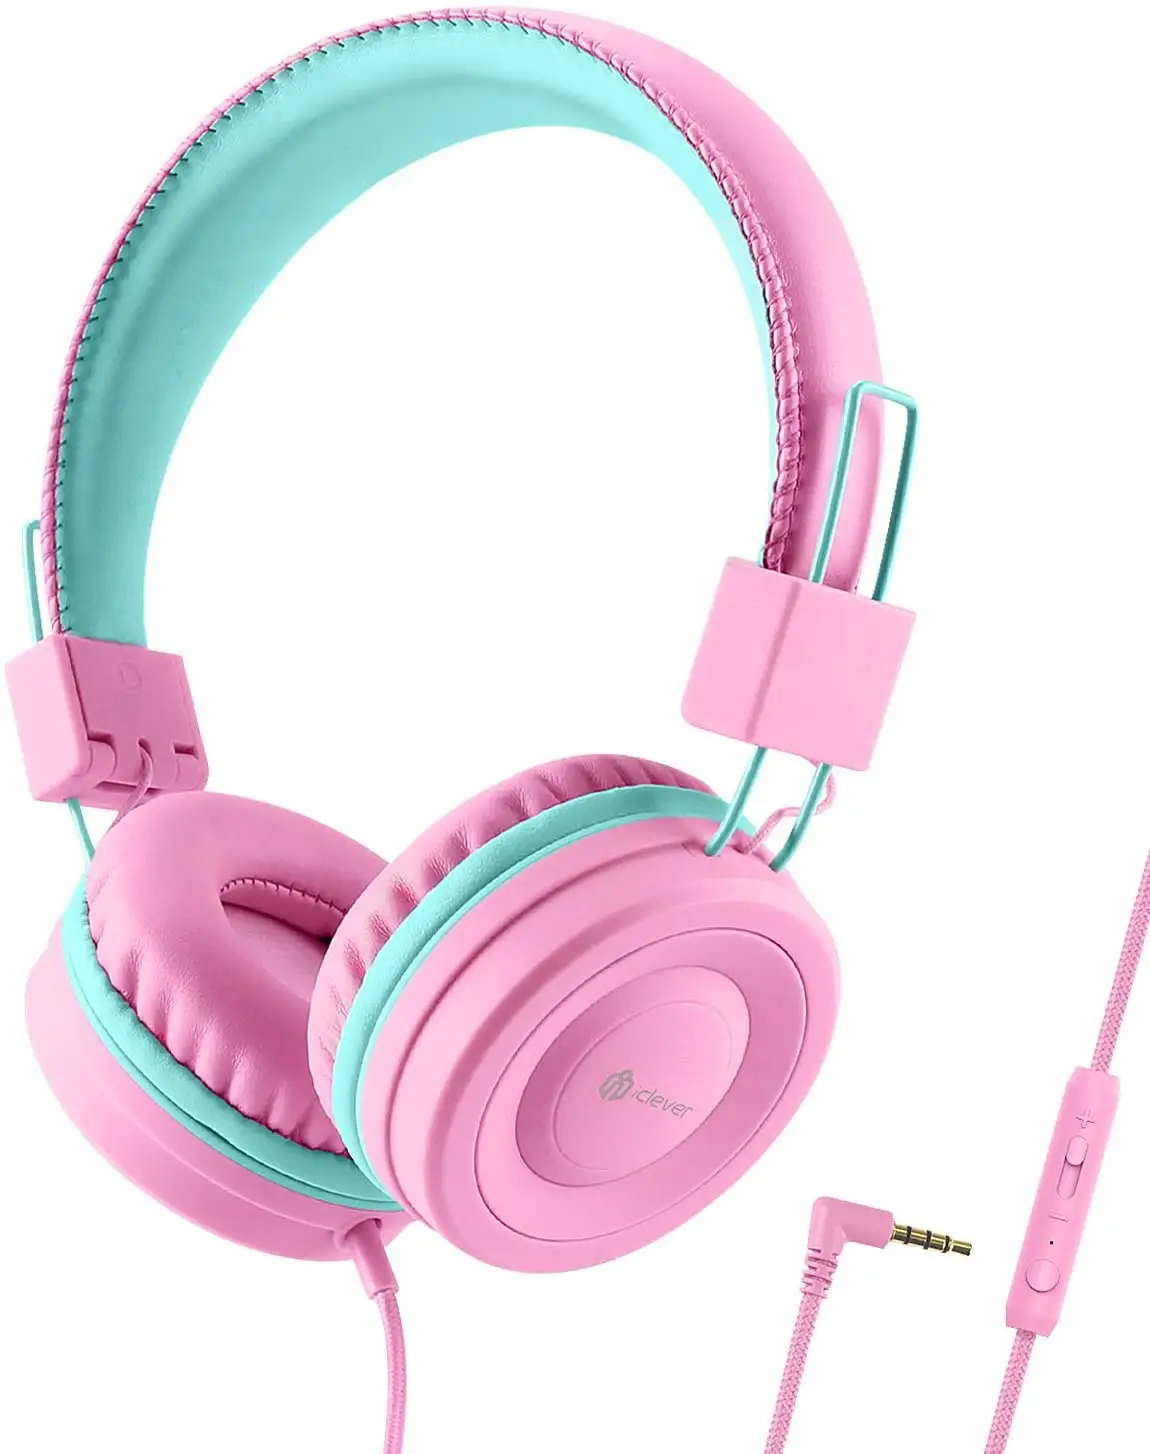 iClever Wired Headphone HS14 Adjustable Headband Stereo Sound Foldable headset for kids,pink color